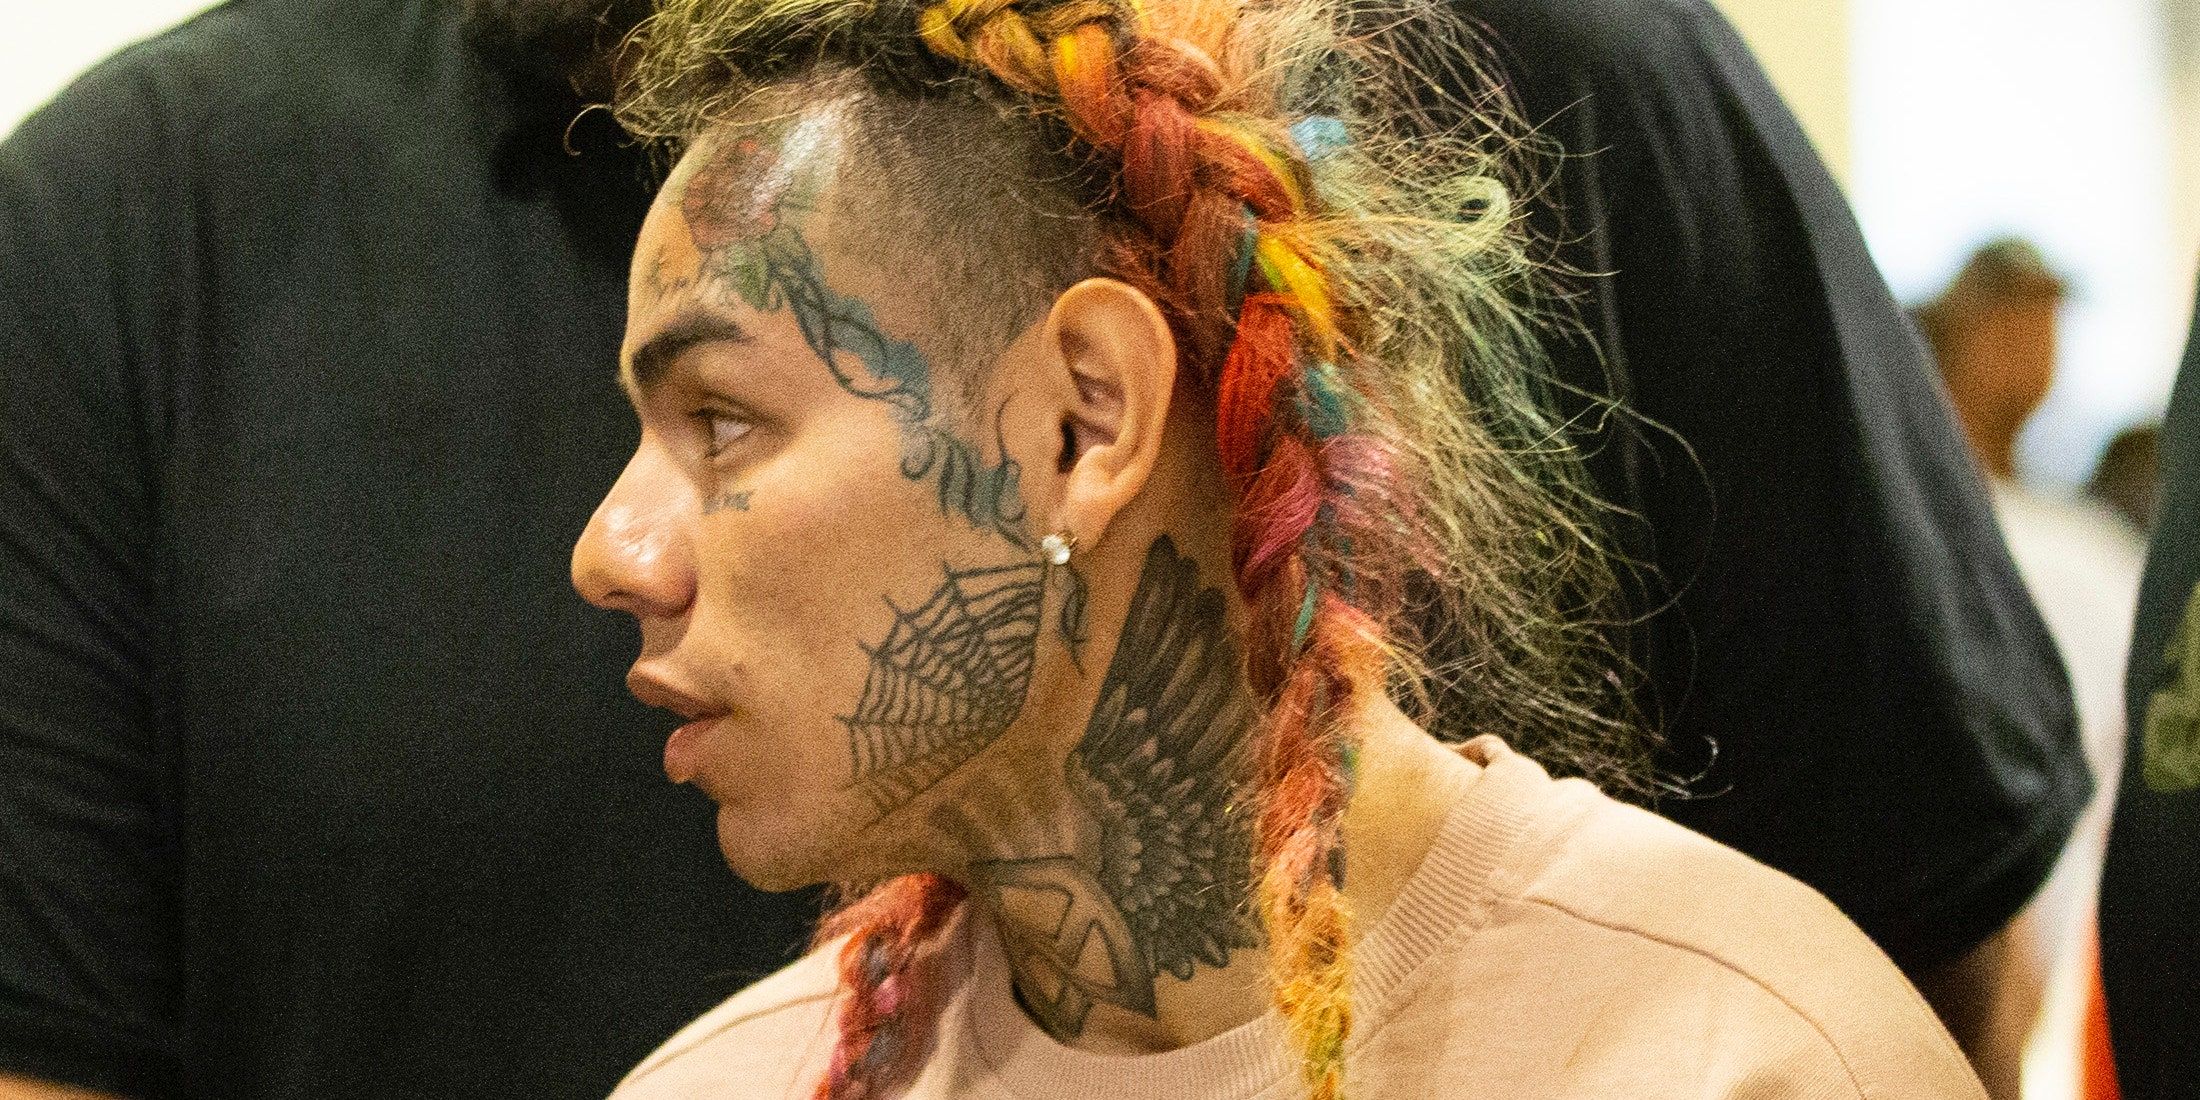 Tekashi 6ix9ine Shares “GOOBA, ” First New Song Since Prison Release